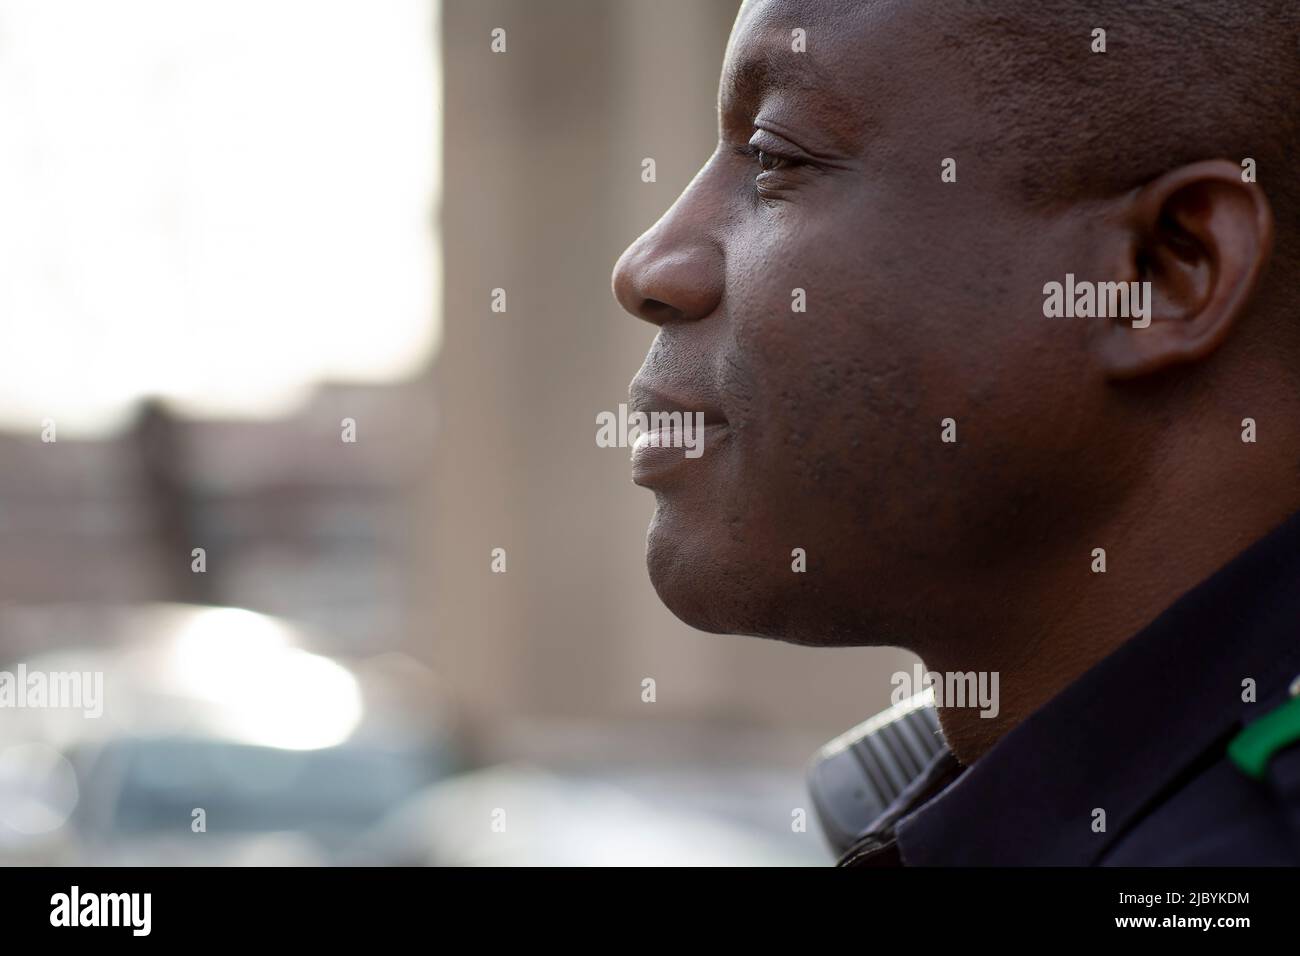 Close up profile Portrait of uniformed Police officer sitting outside looking off camera Stock Photo